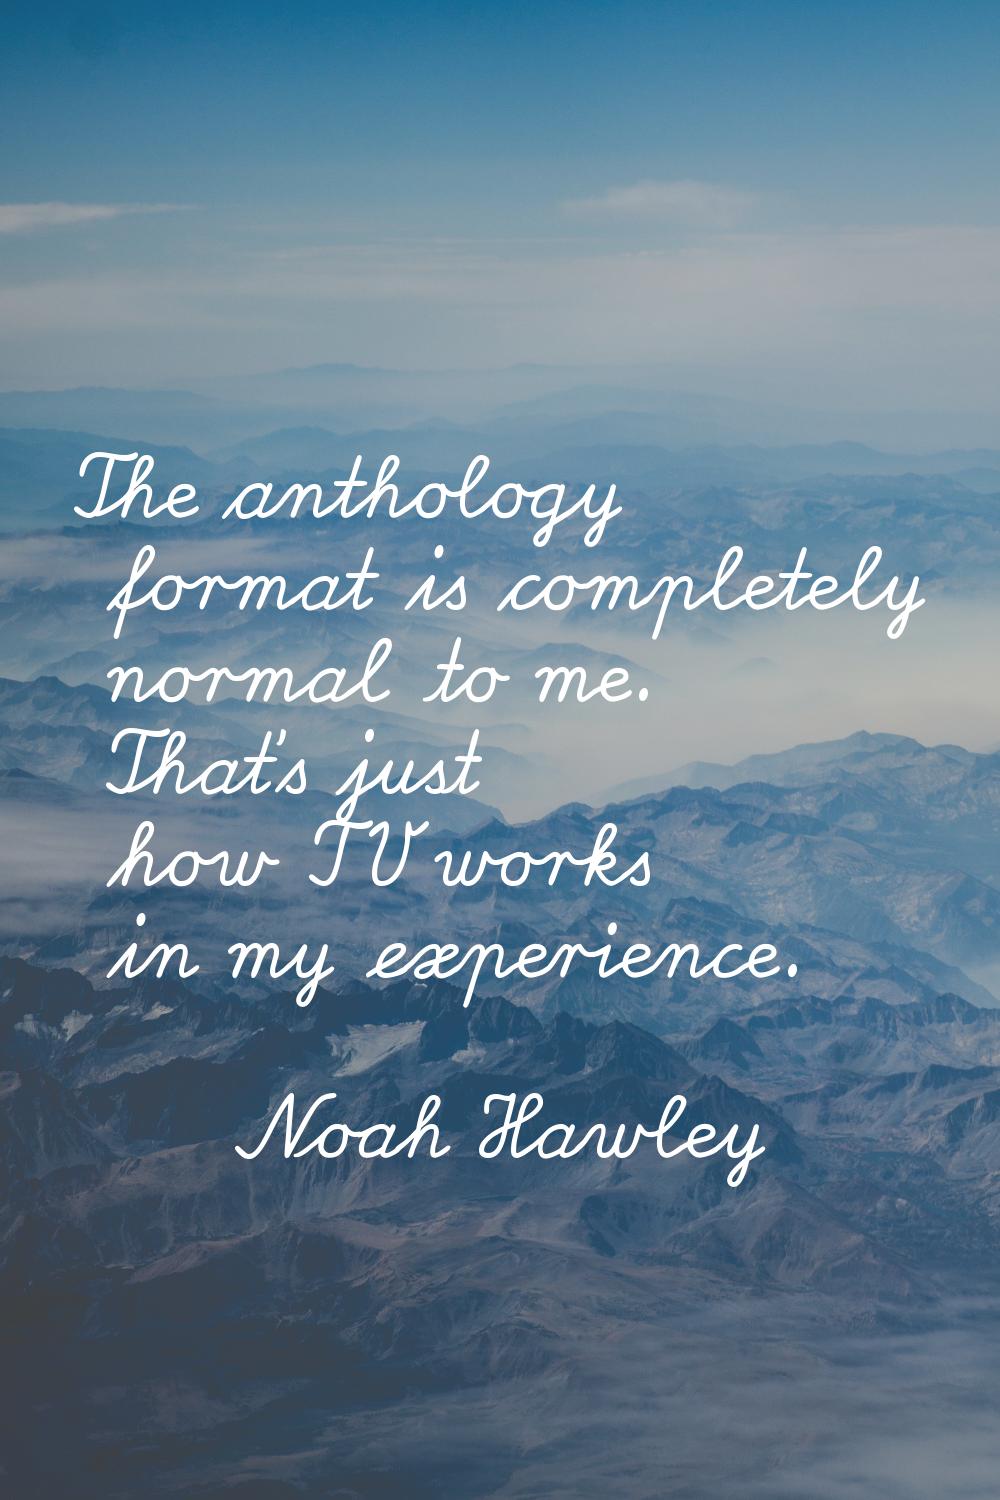 The anthology format is completely normal to me. That's just how TV works in my experience.